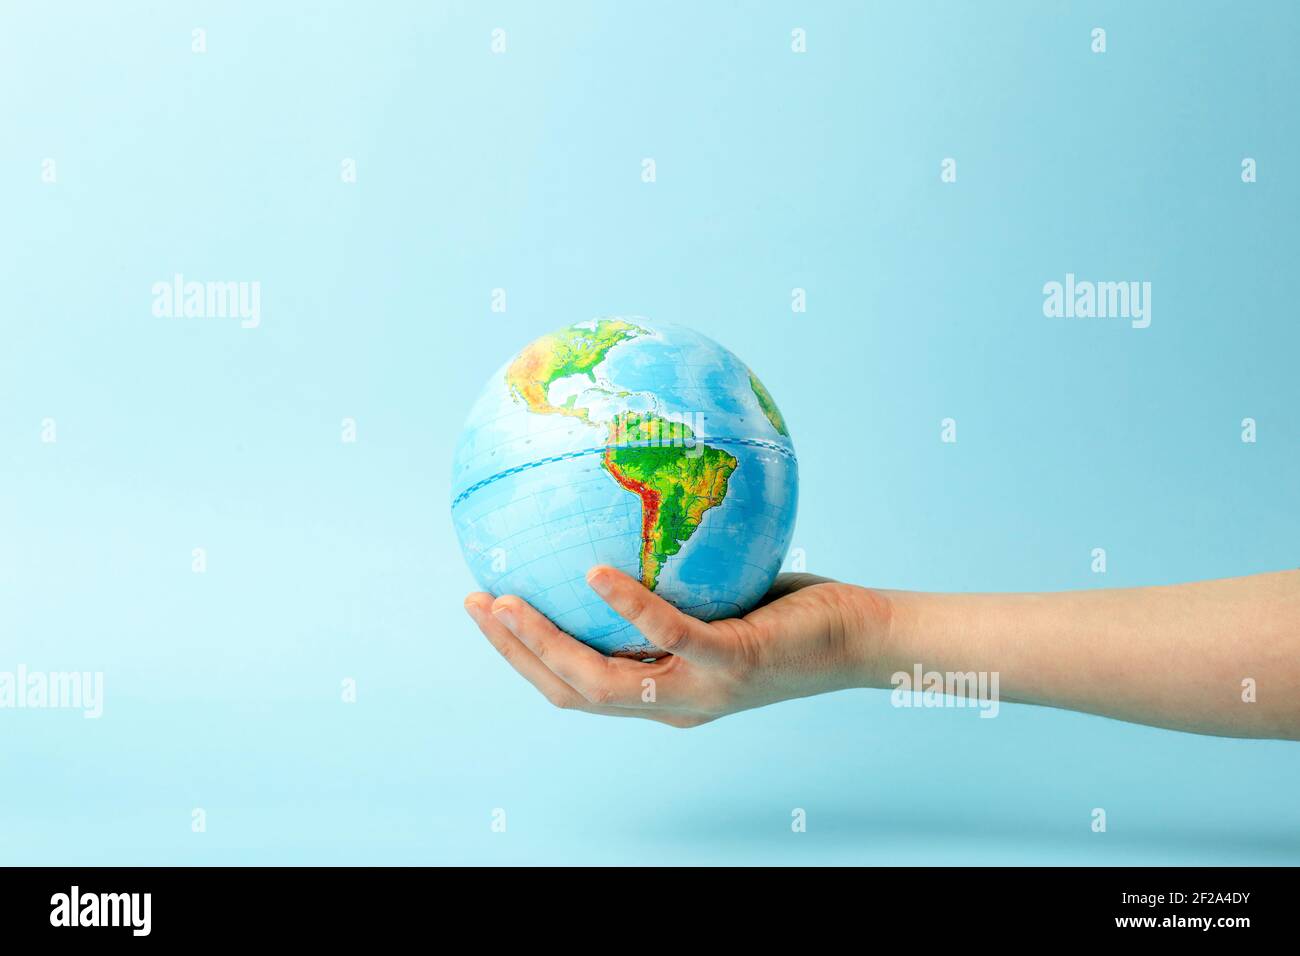 Earth globe in hands on a clean blue background. The concept of protecting nature, ecology and global peace. High quality photo Stock Photo